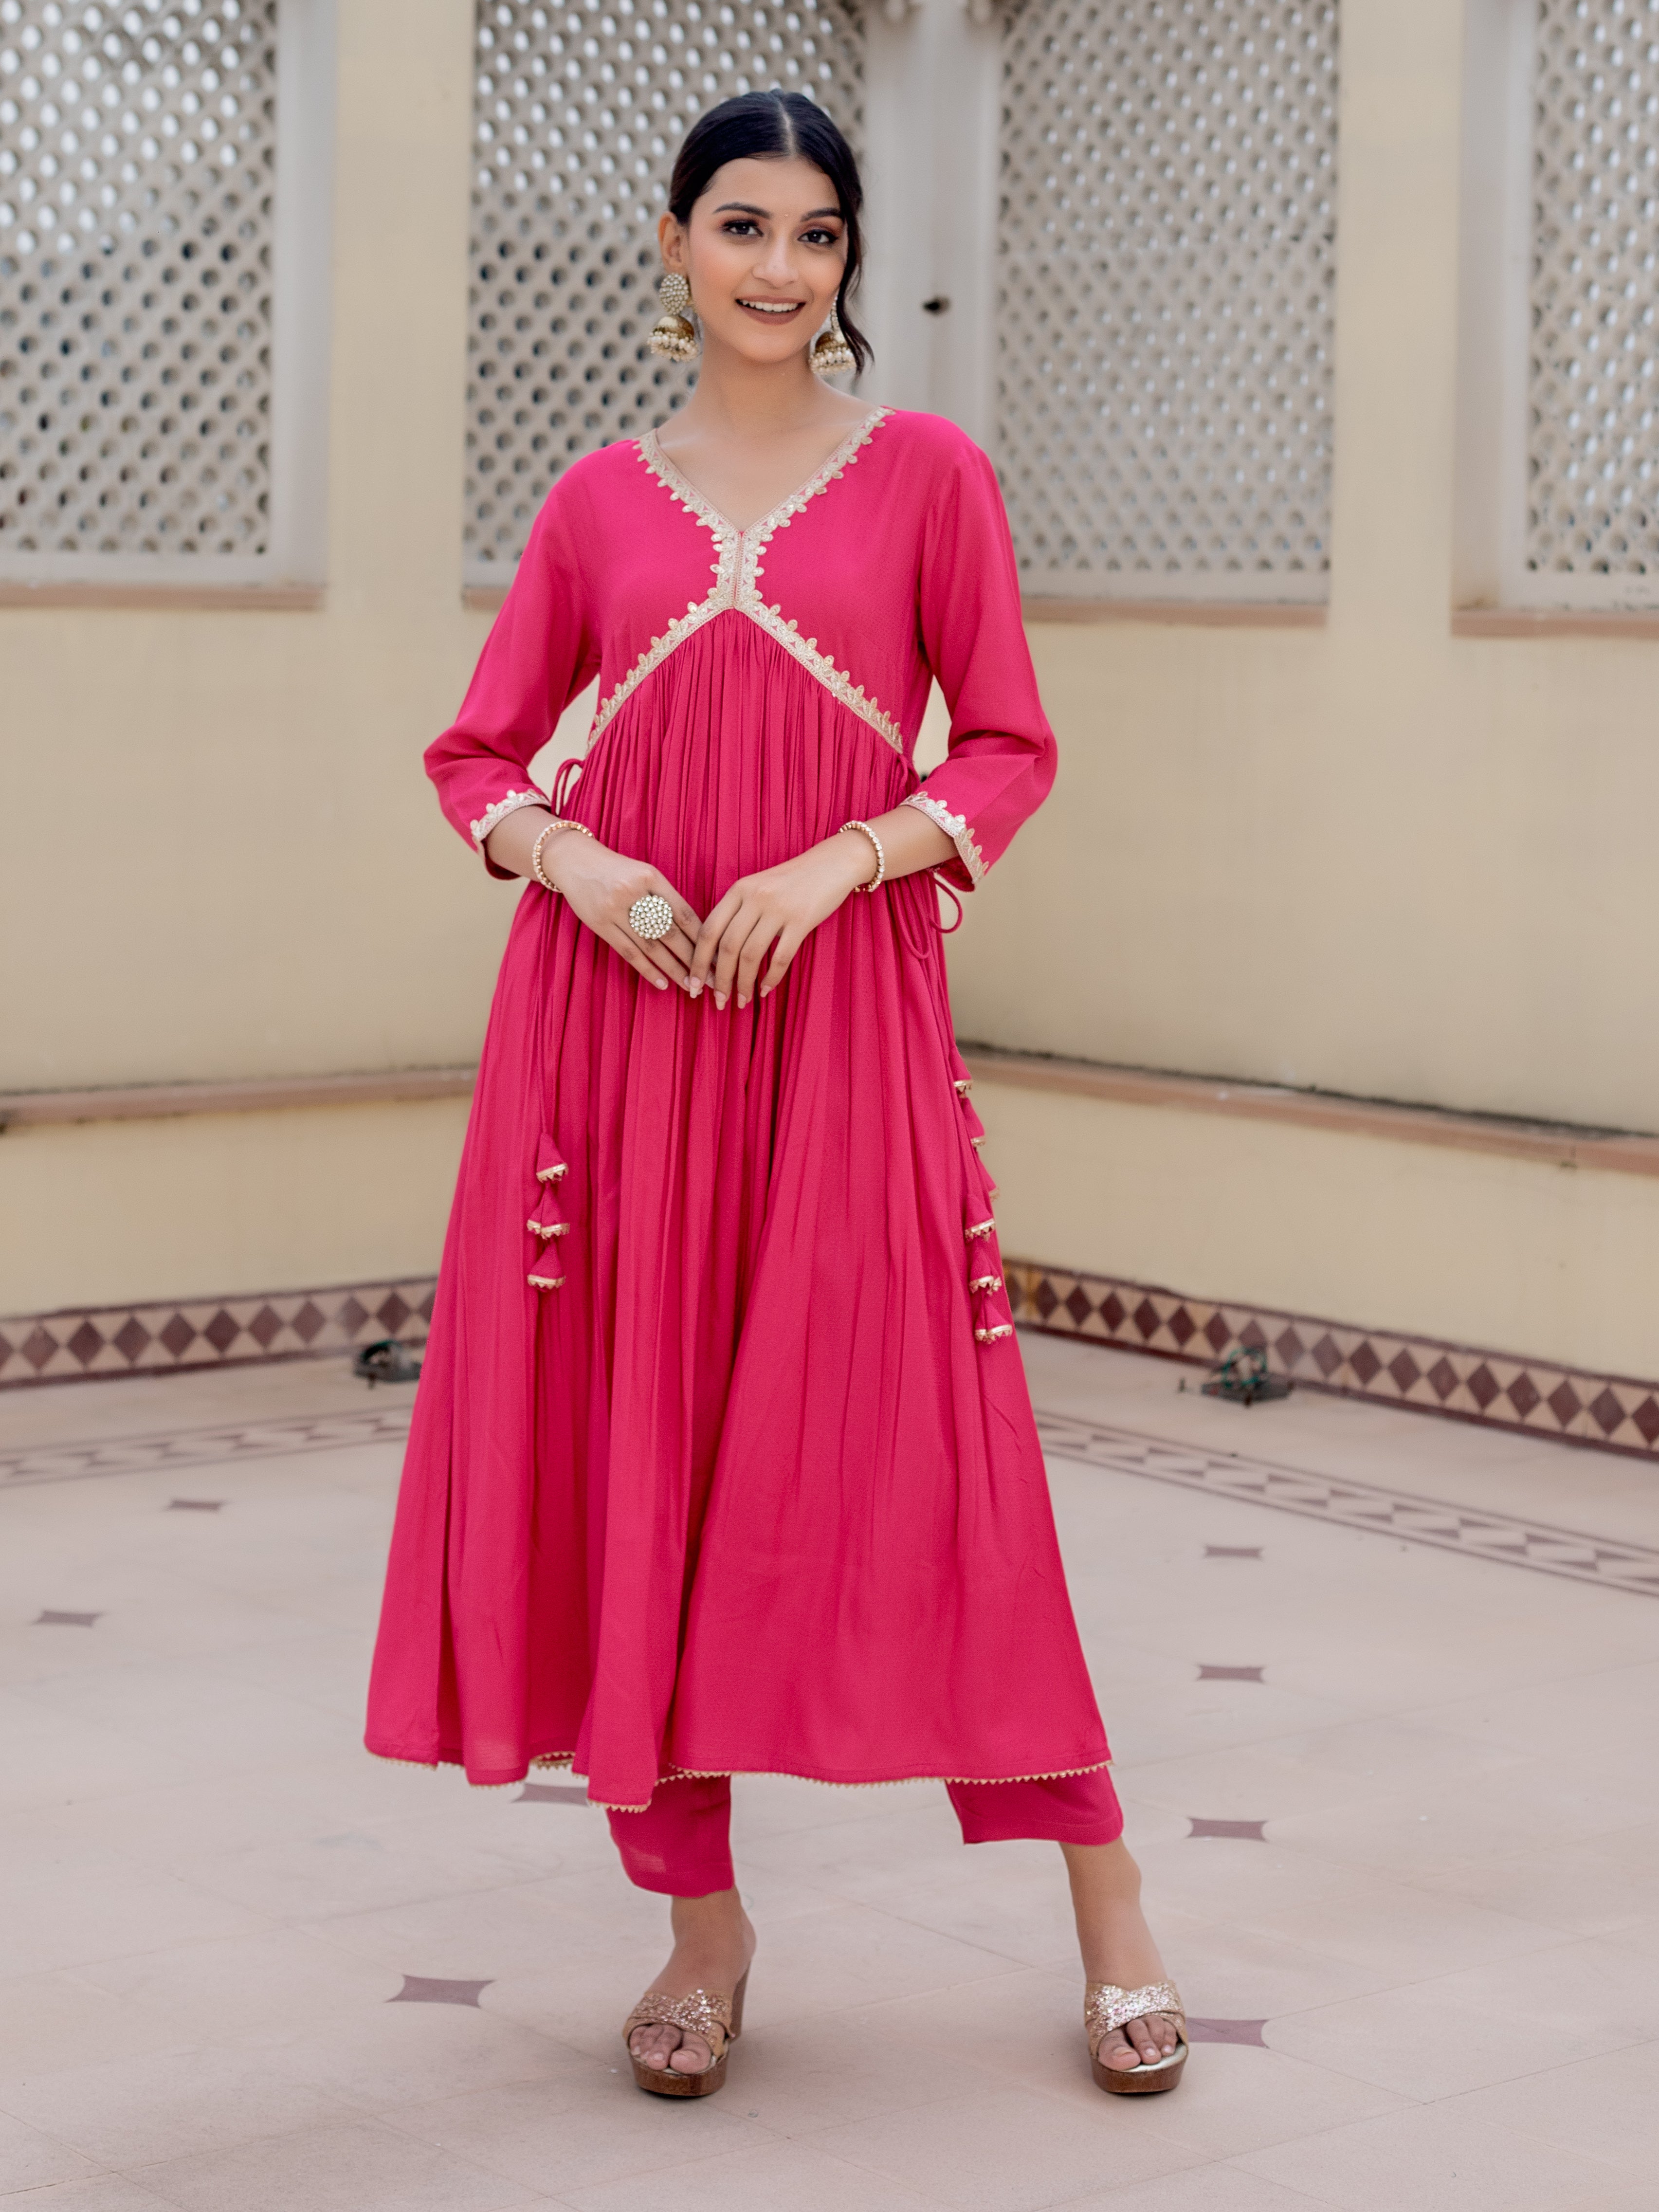 look-effortlessly-stylish-with-this-beautiful-v-neck-pink-a-line-kurta-with-pant-featuring-intricate-lace-detailing-and-side-tassels-this-kurta-is-sure-to-make-a-statement-and-is-perfect-for-a-variety-of-occasions